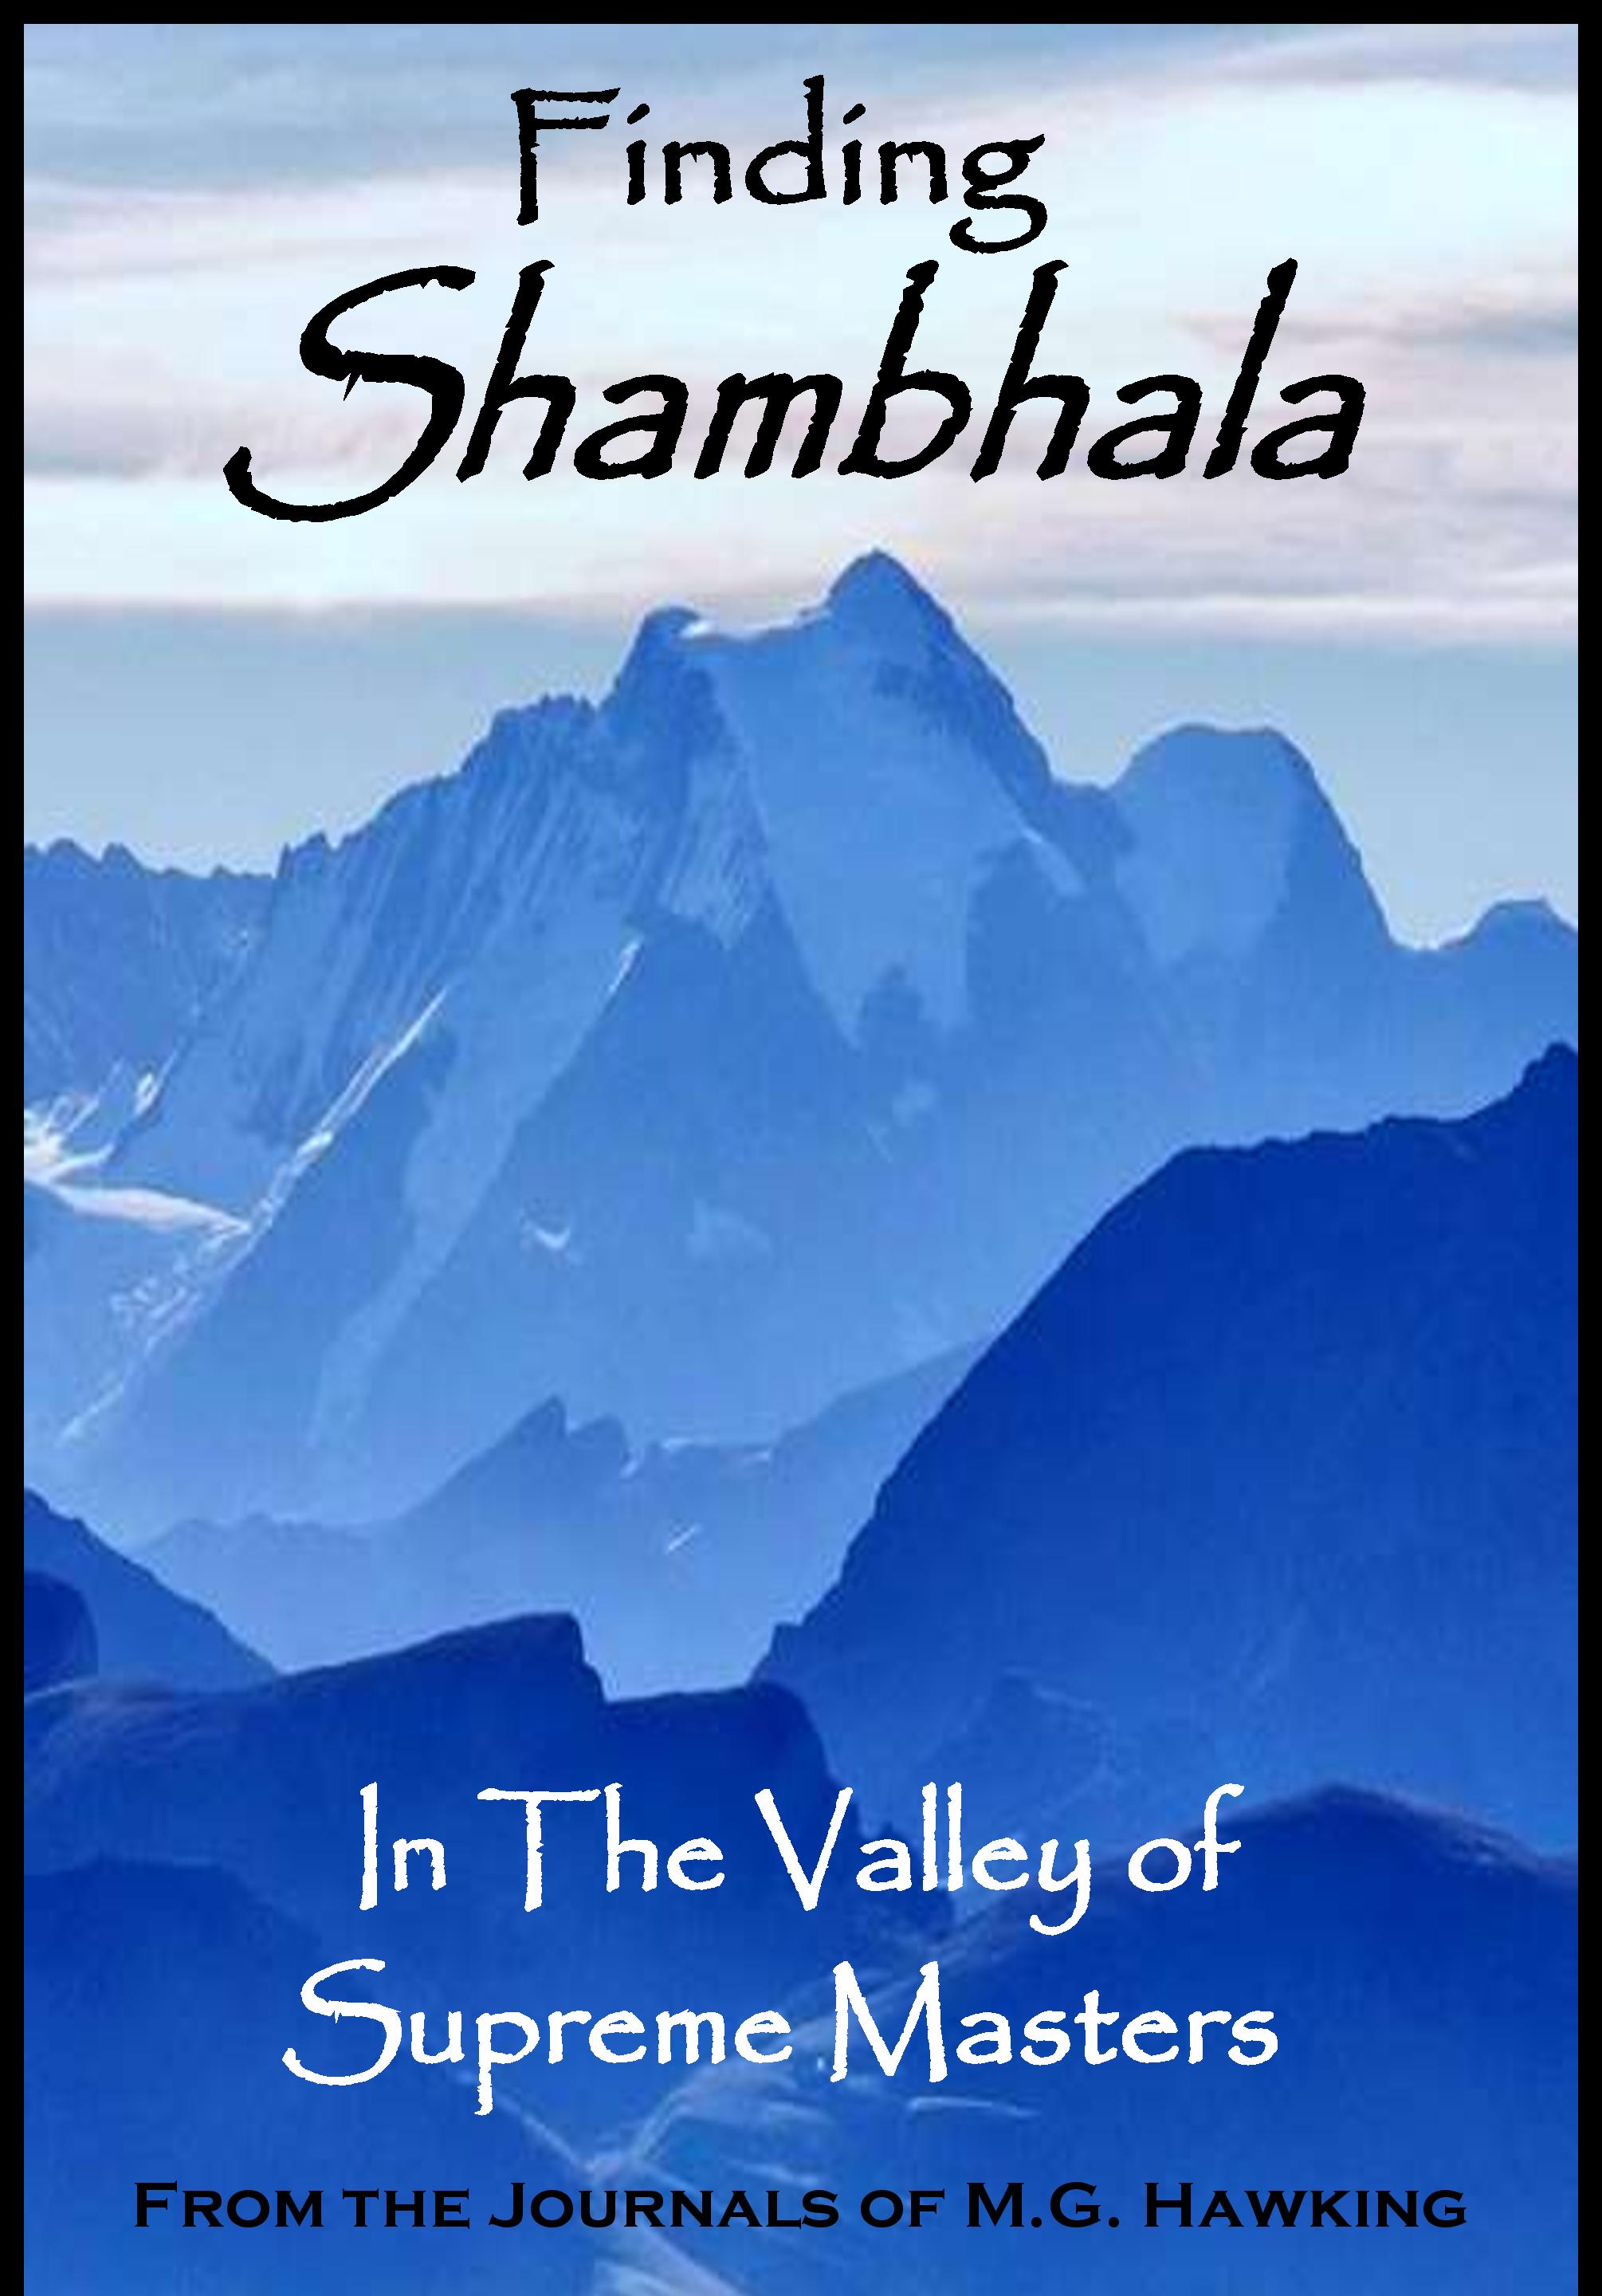 FREE: Finding Shambhala: In The Valley of Supreme Masters by M.G. Hawking, Heather Cantrell, Jenna Wolfe